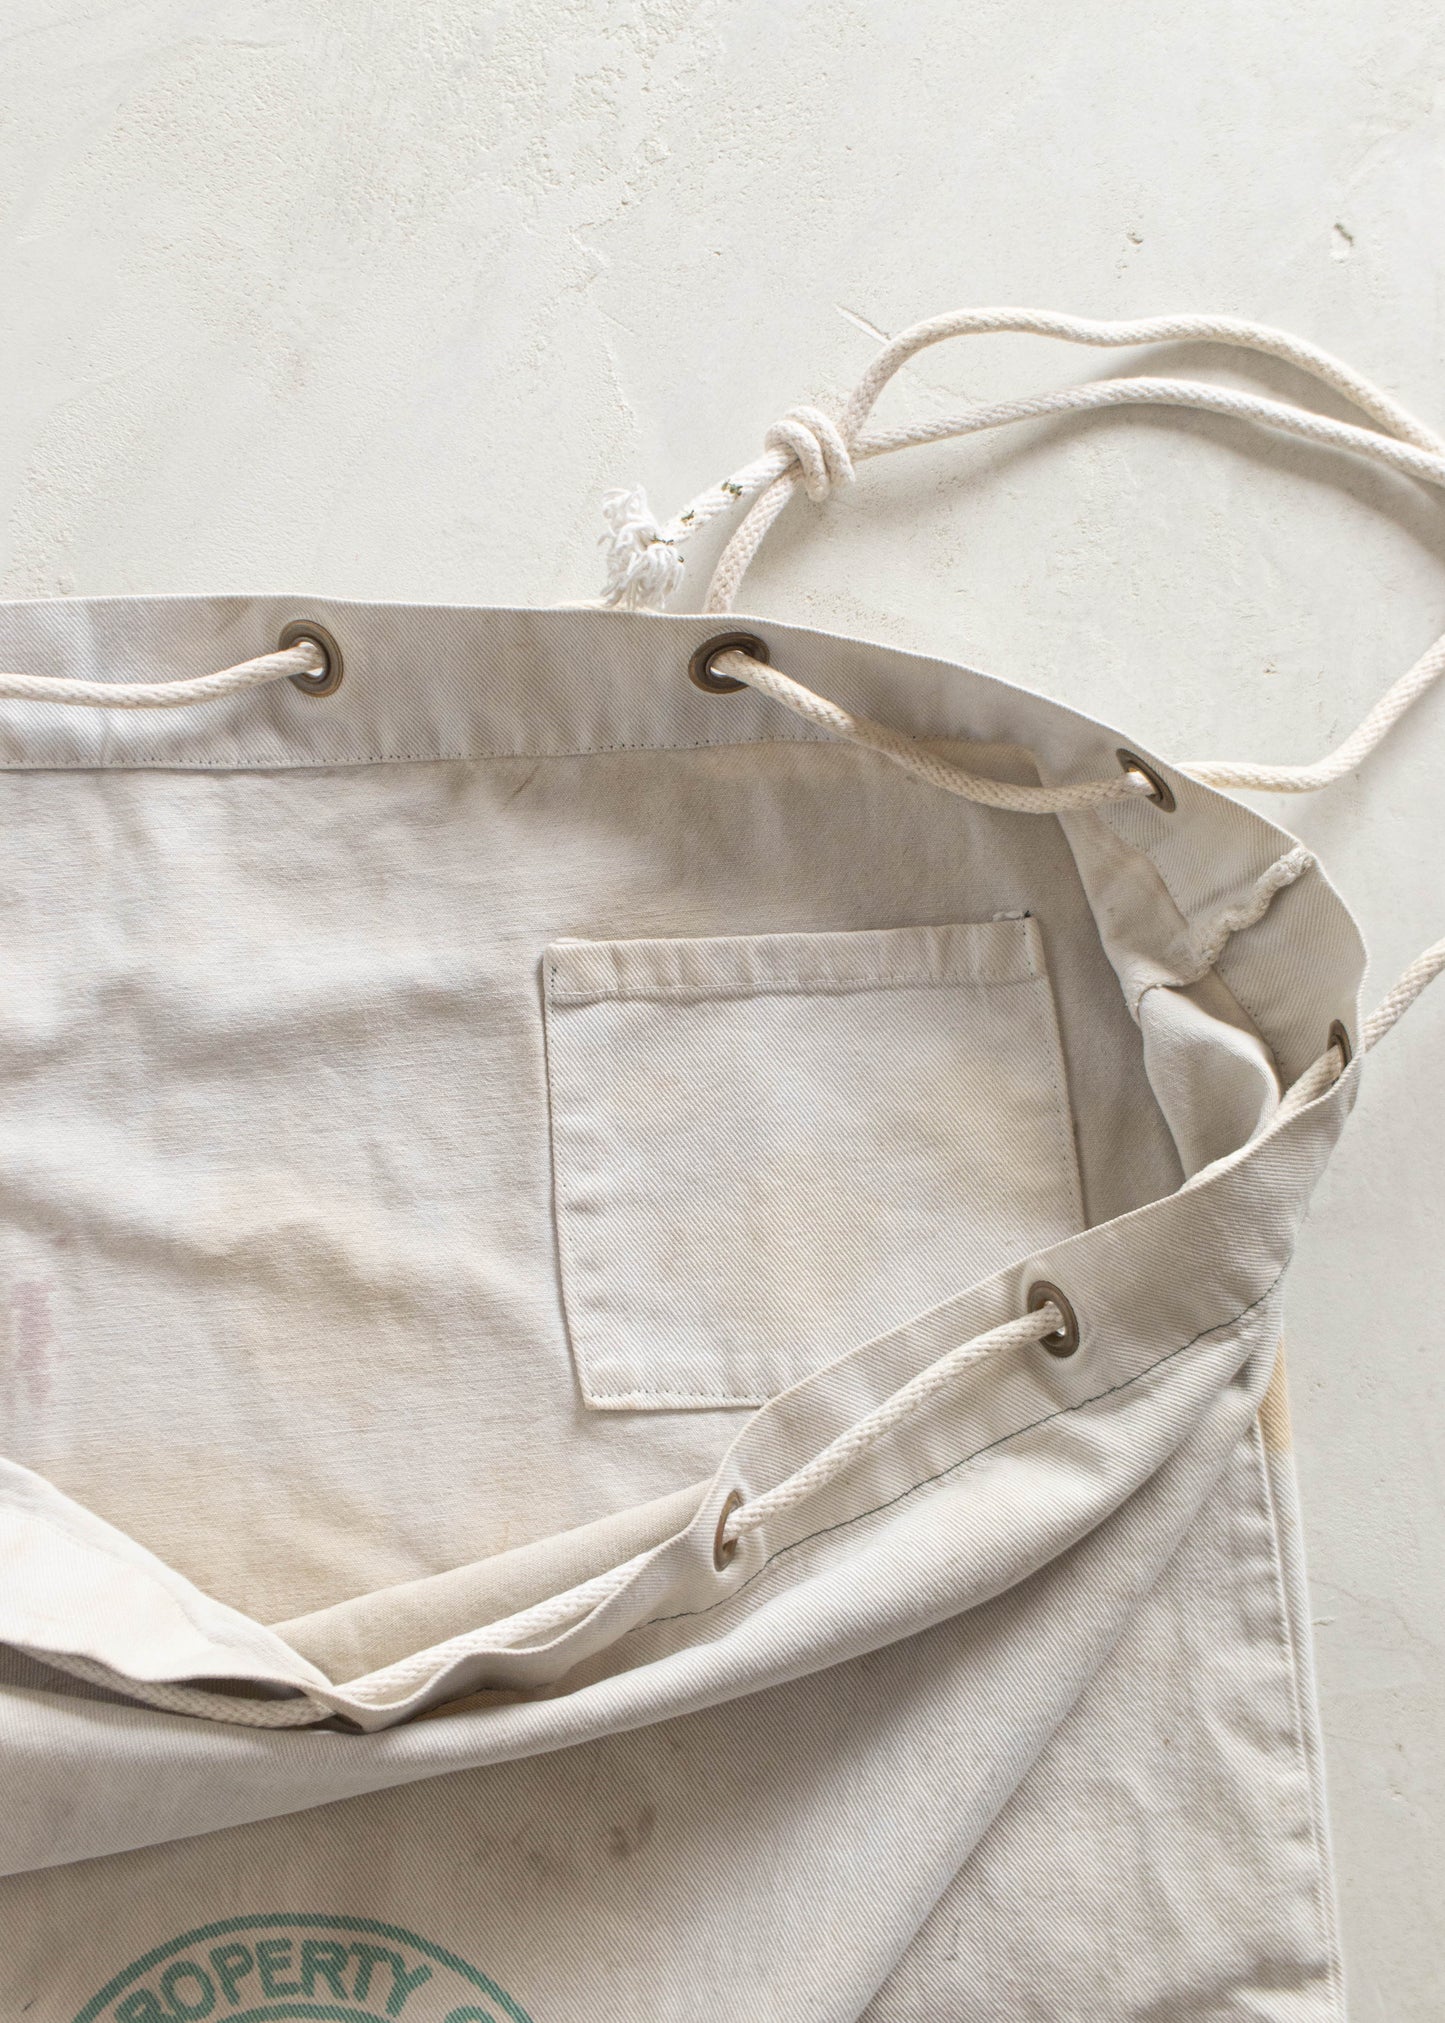 Vintage 1970s Canadian Linen Supply Cotton Twill Laundry Bag